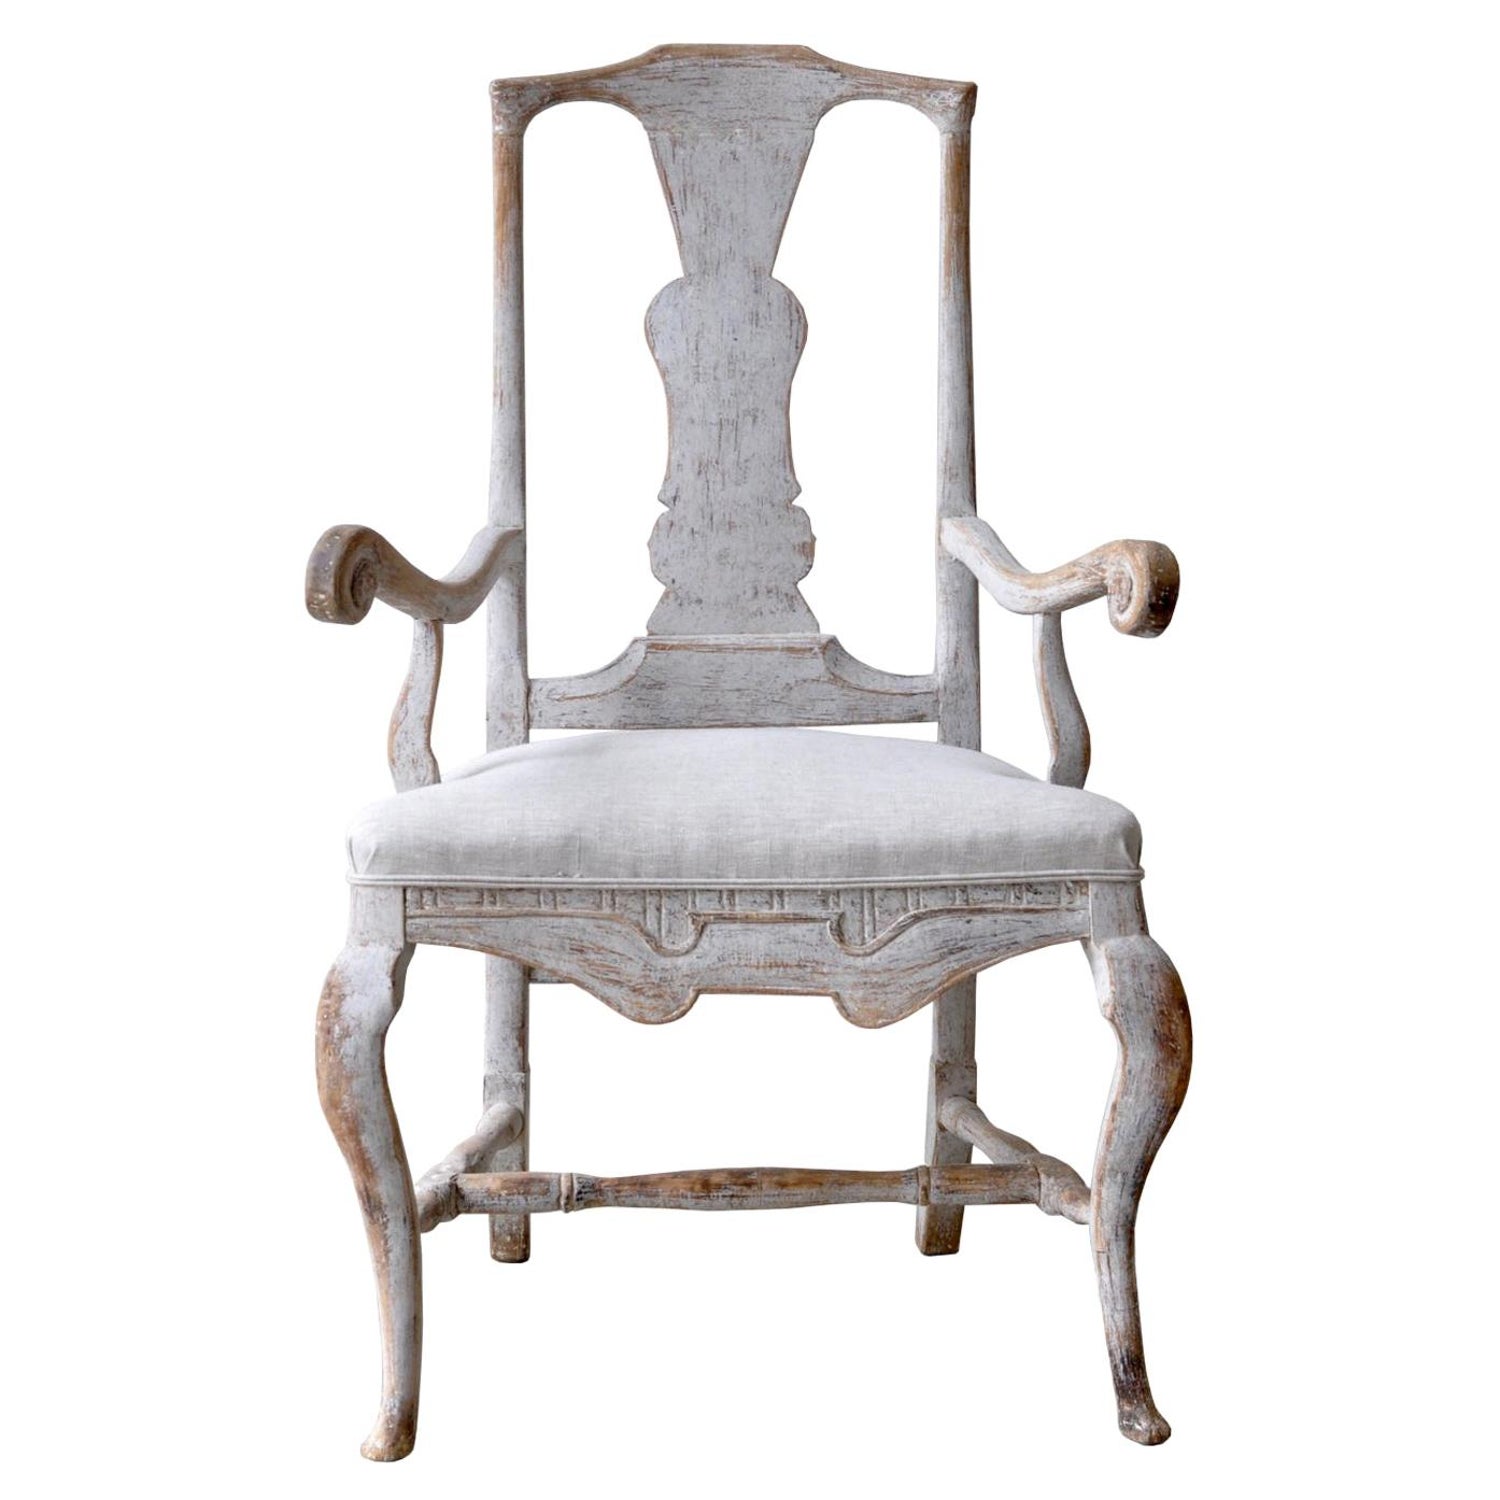 Large Period Baroque Arm Chair For Sale at 1stDibs